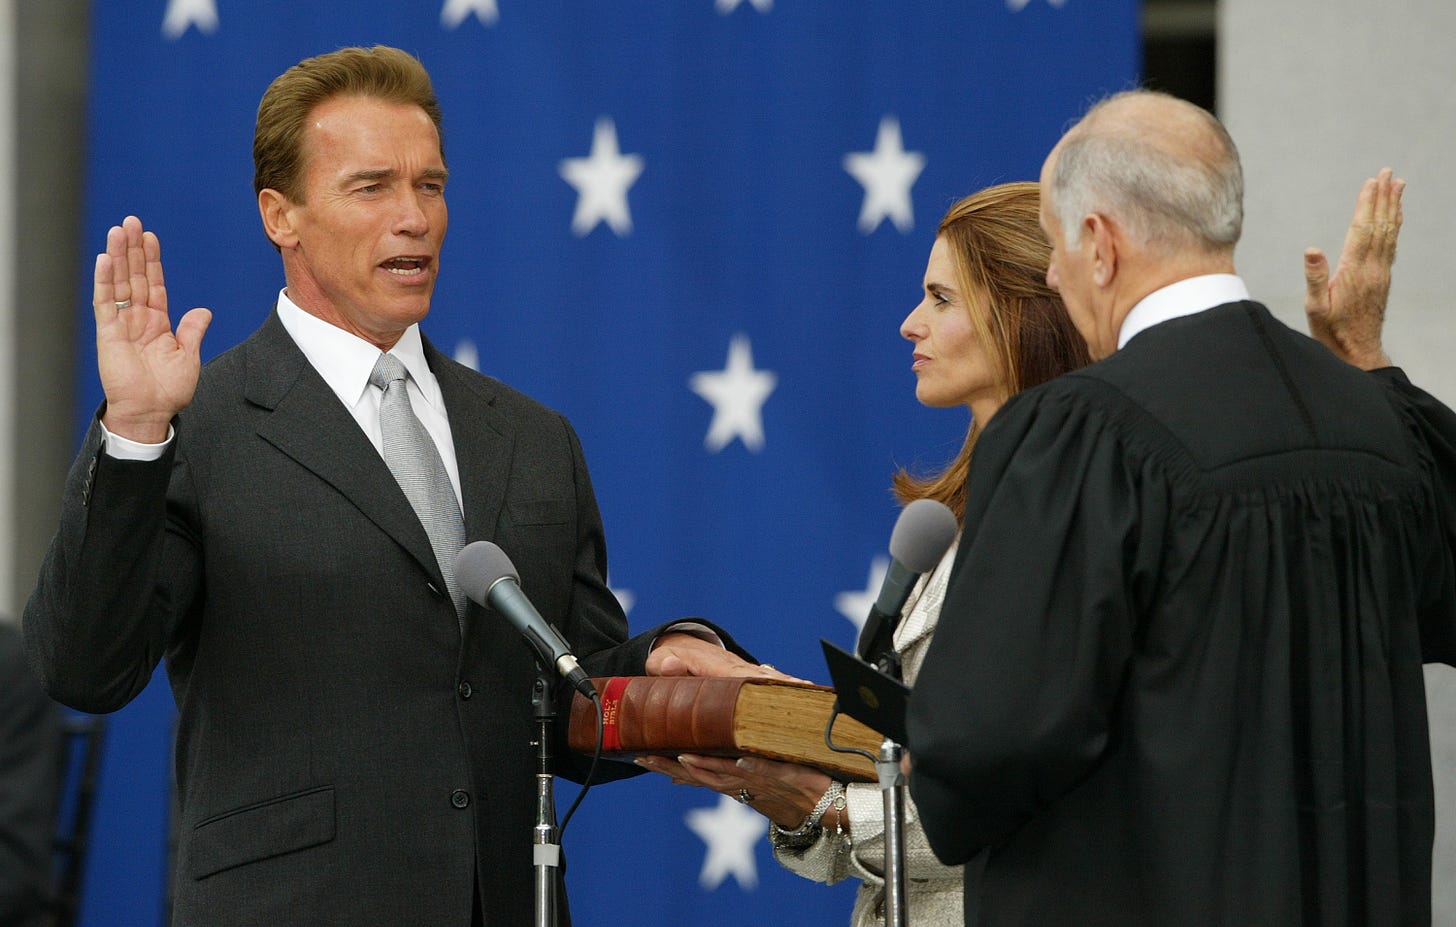 Arnold Schwarzenegger served as Governor of California (with a GDP larger than the UK) from 2003-2011. It’s not easy to be a successful leader in multiple worlds.